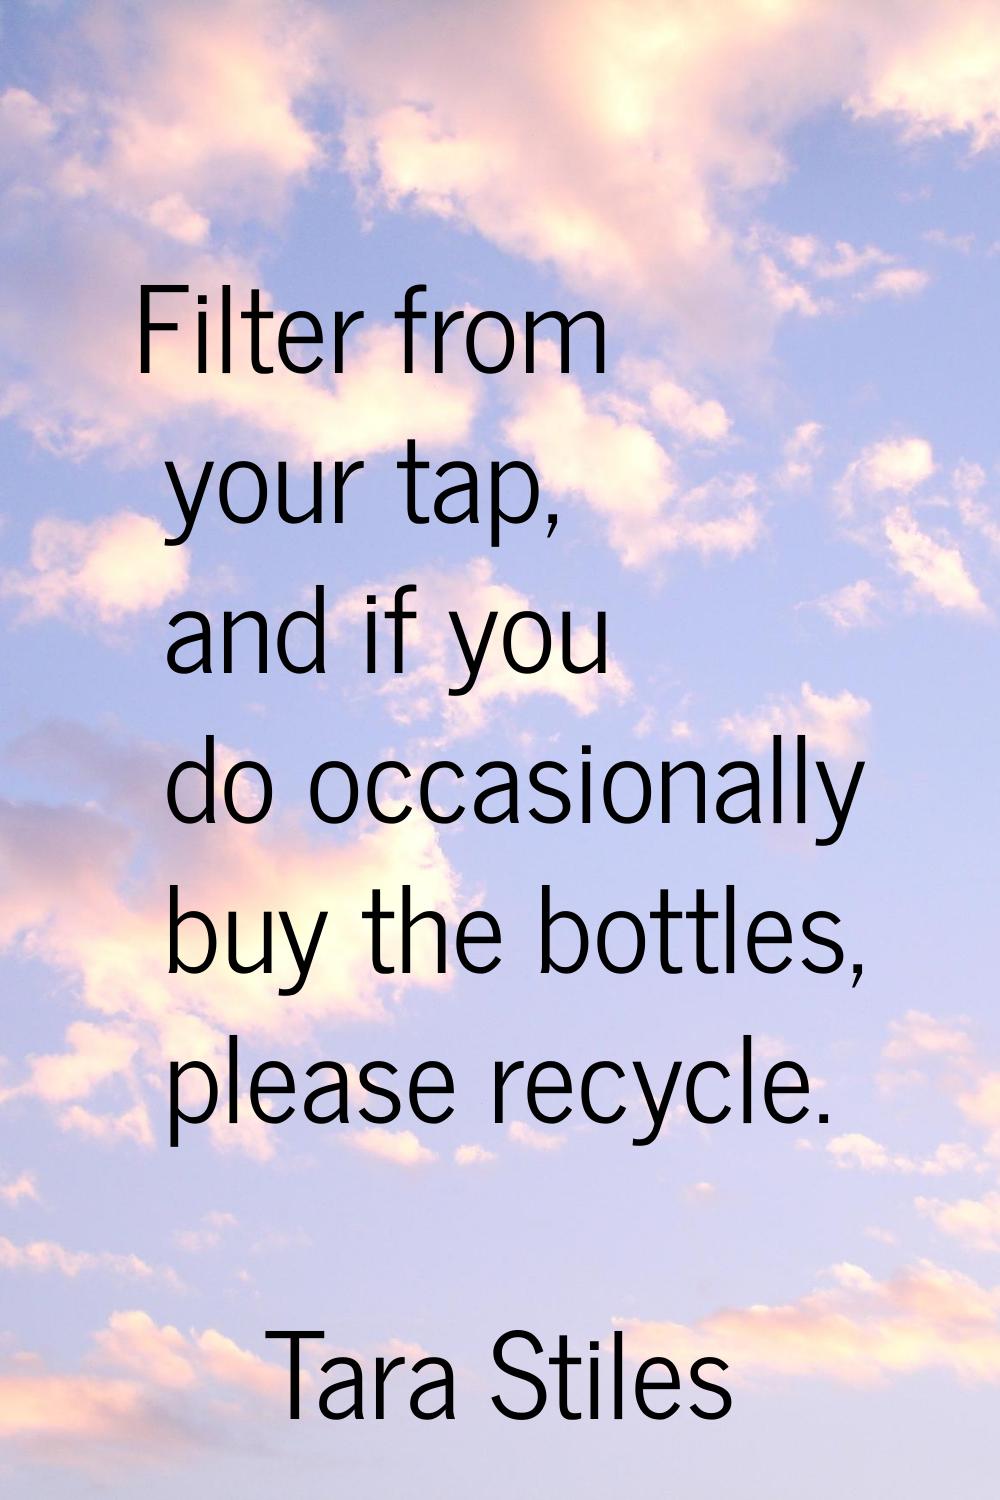 Filter from your tap, and if you do occasionally buy the bottles, please recycle.